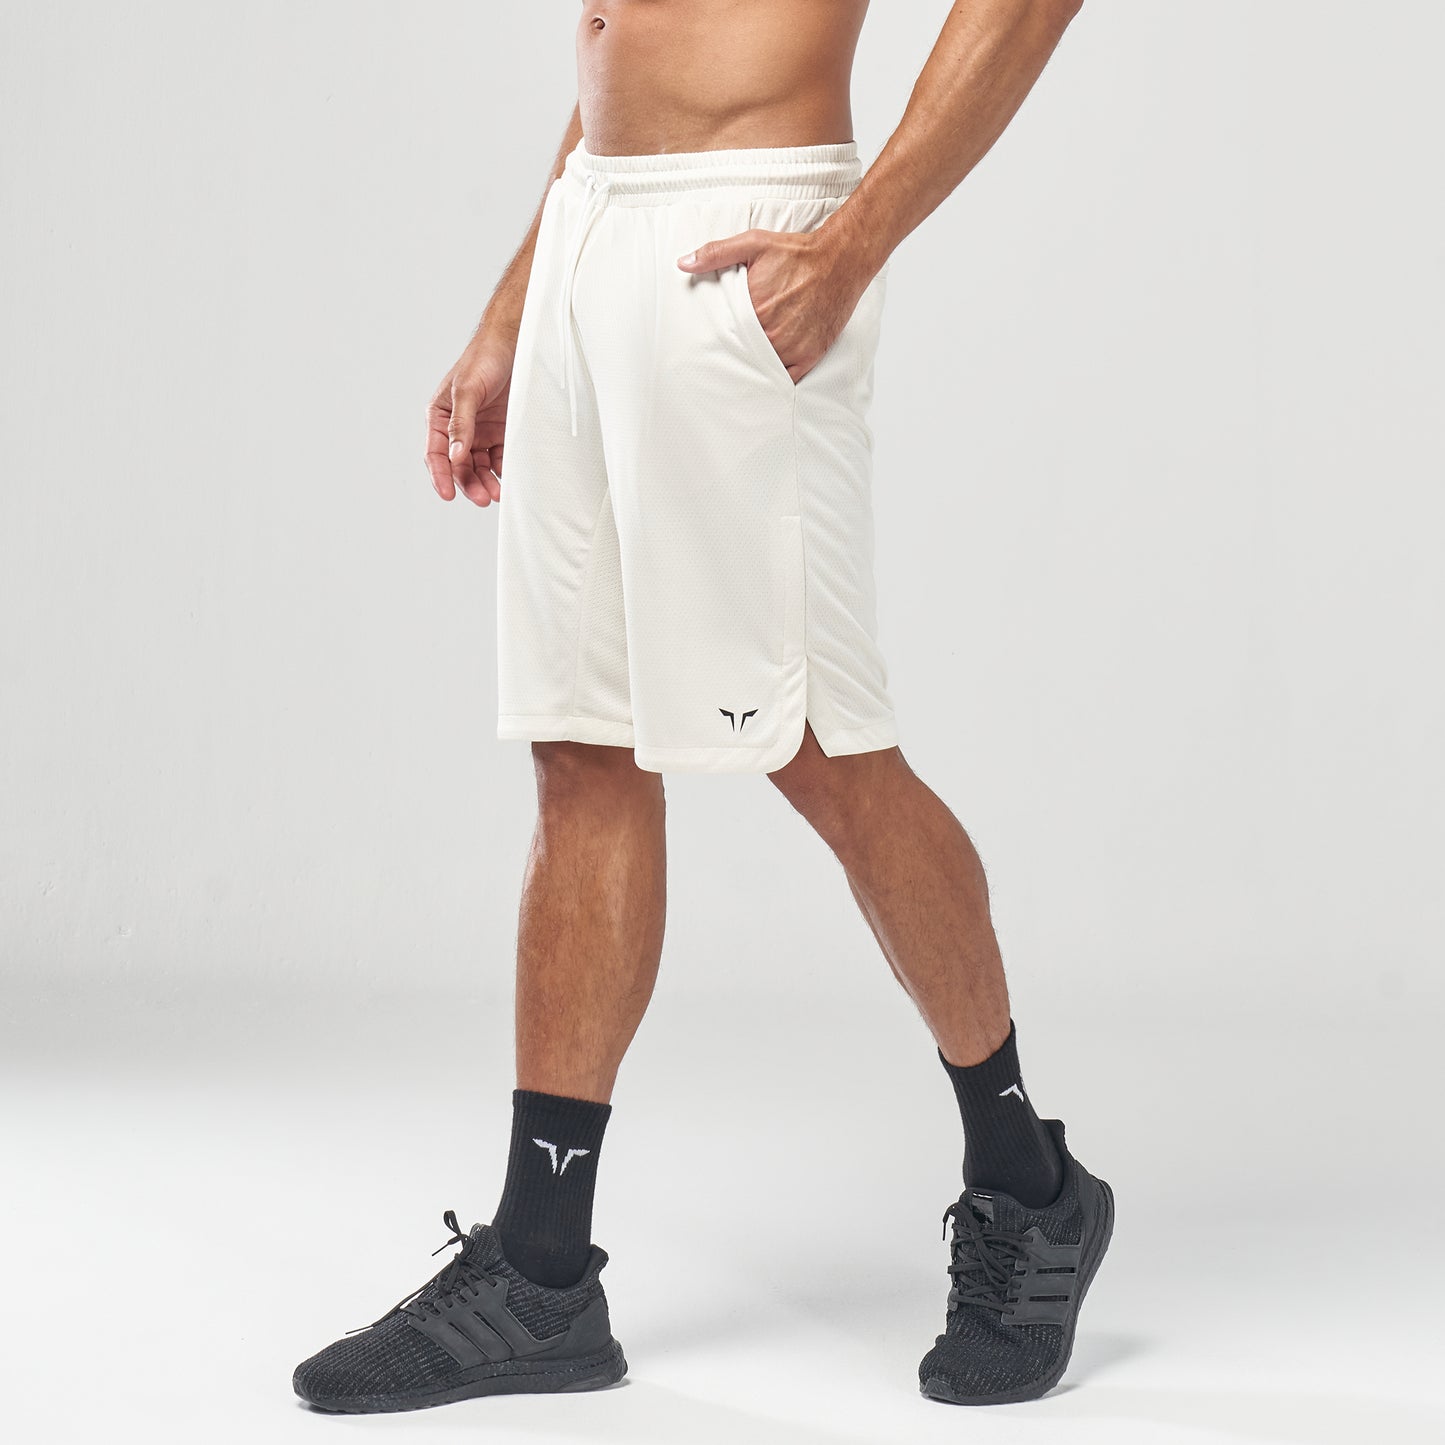 squatwolf-gym-wear-code-basketball-shorts-white-workout-short-for-men